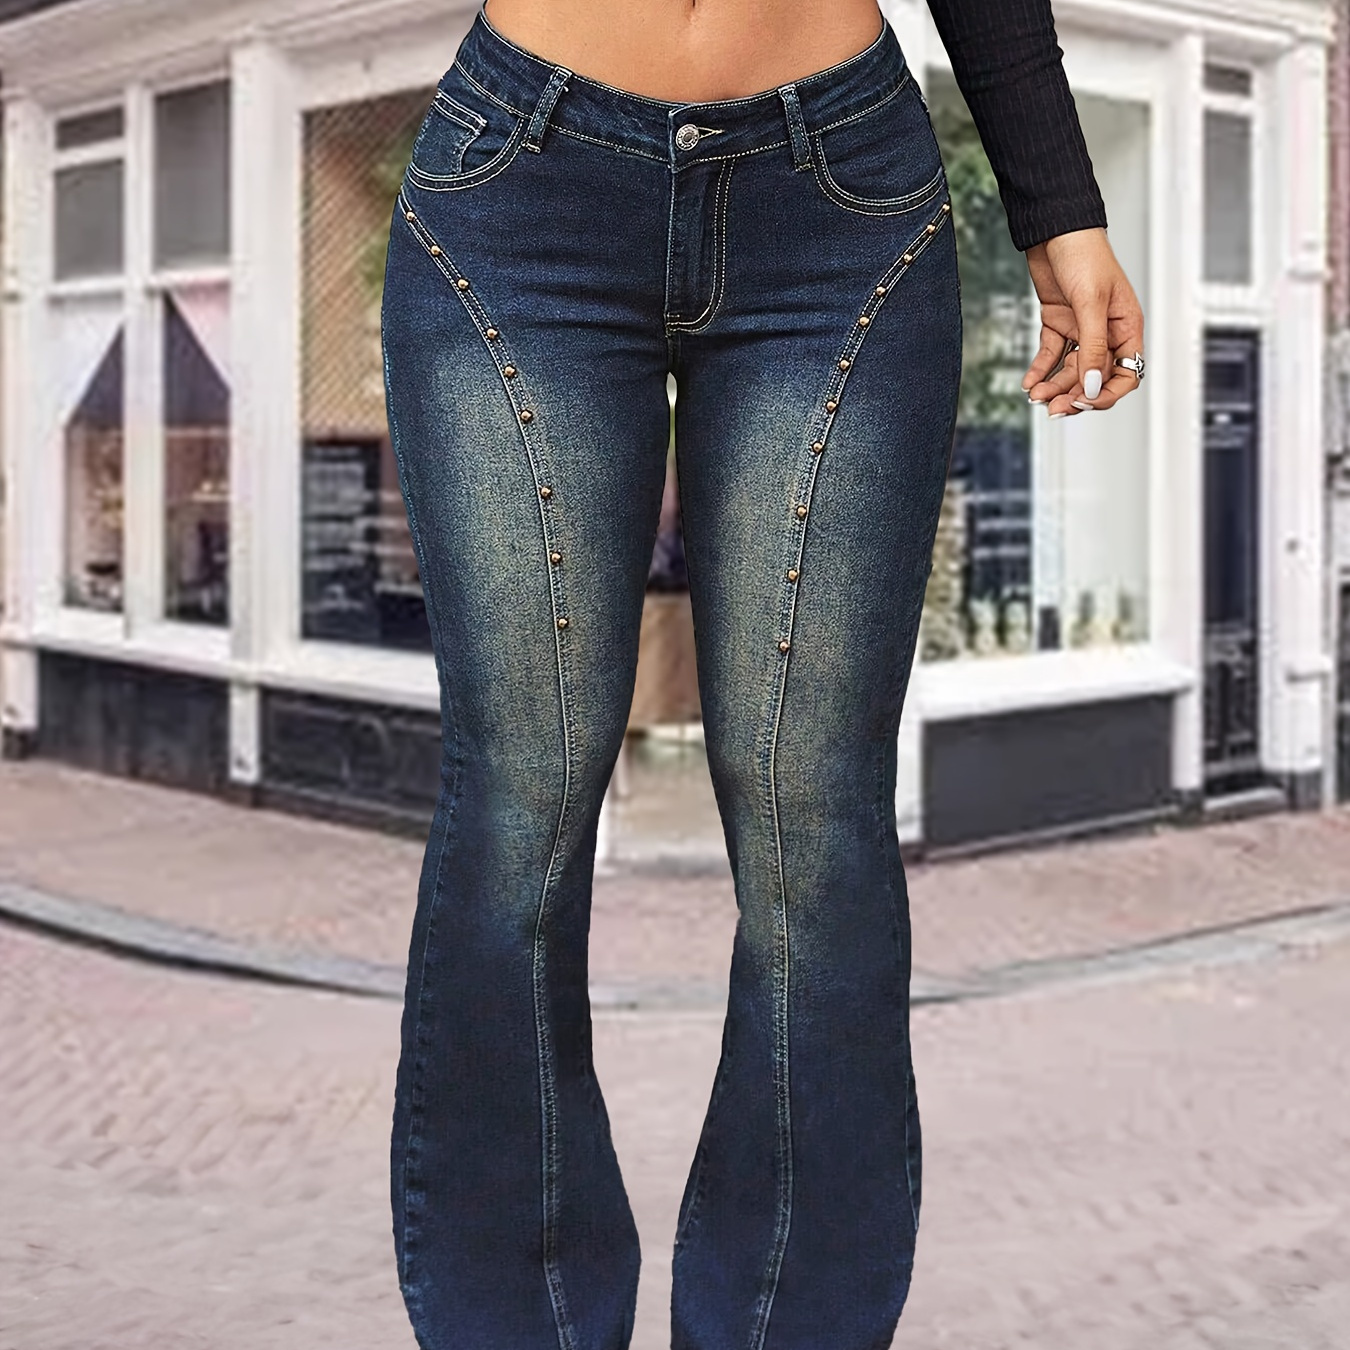 

Women's Fashion Plus Size Flared Denim Jeans, Elegant Style, High-waist Stretch Bell-bottom Pants With Pocket Detail, Casual Chic Streetwear For Fall